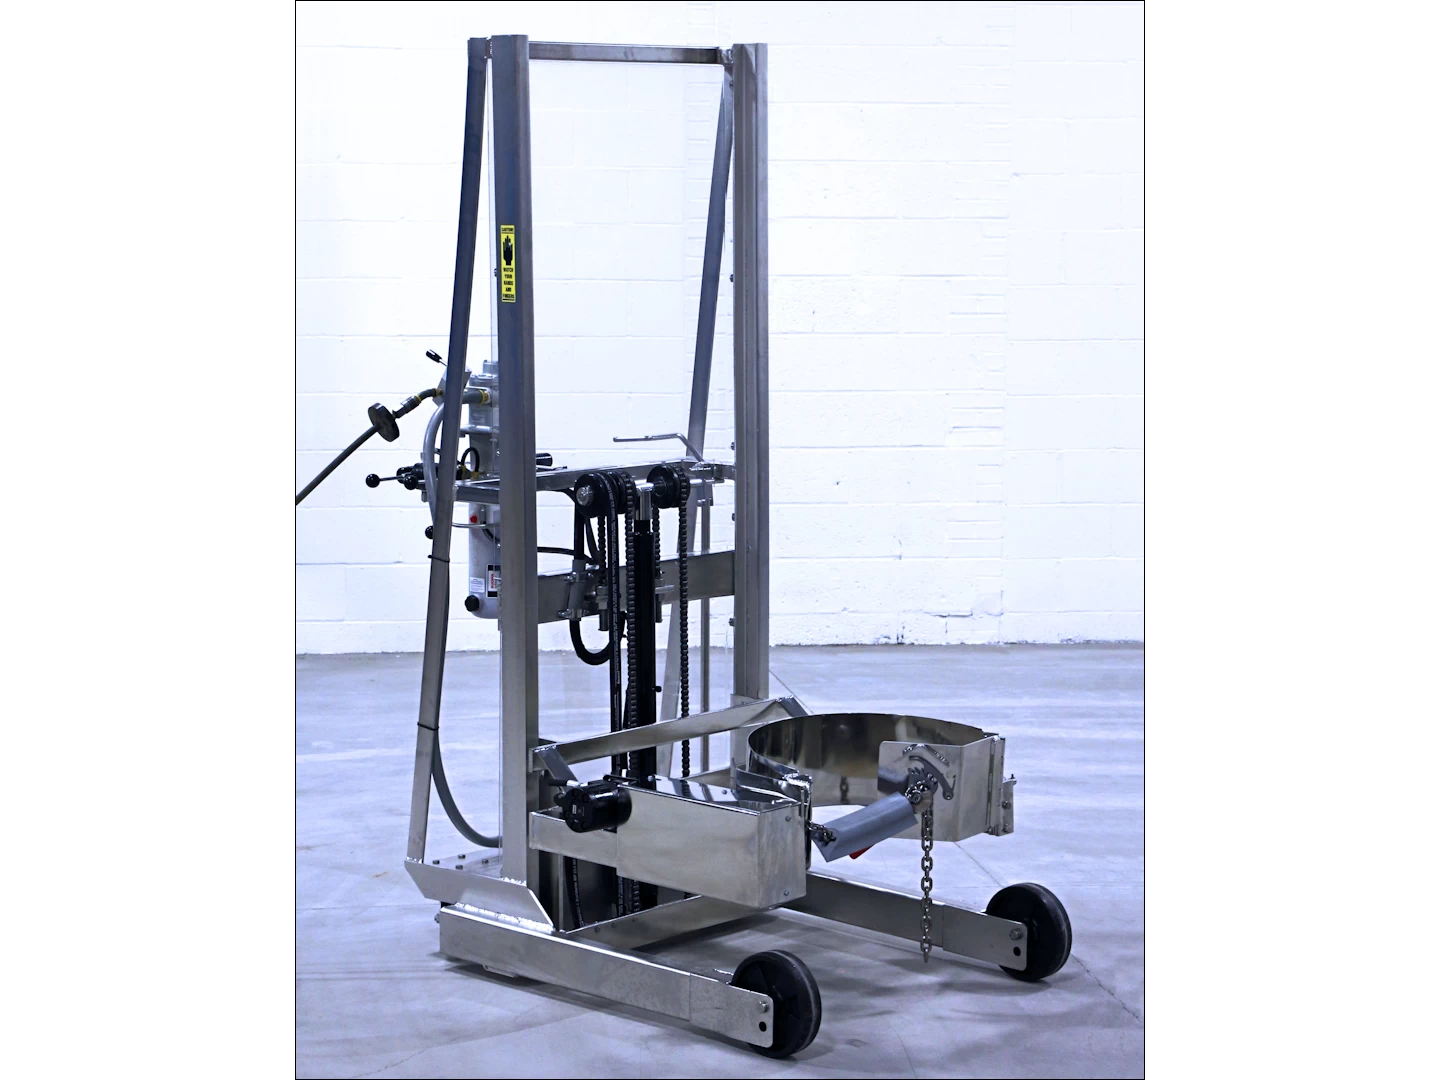 Stainless Steel Vertical-Lift Drum Pourer with Air Power Lift and Tilt Control - Model 510SS-114